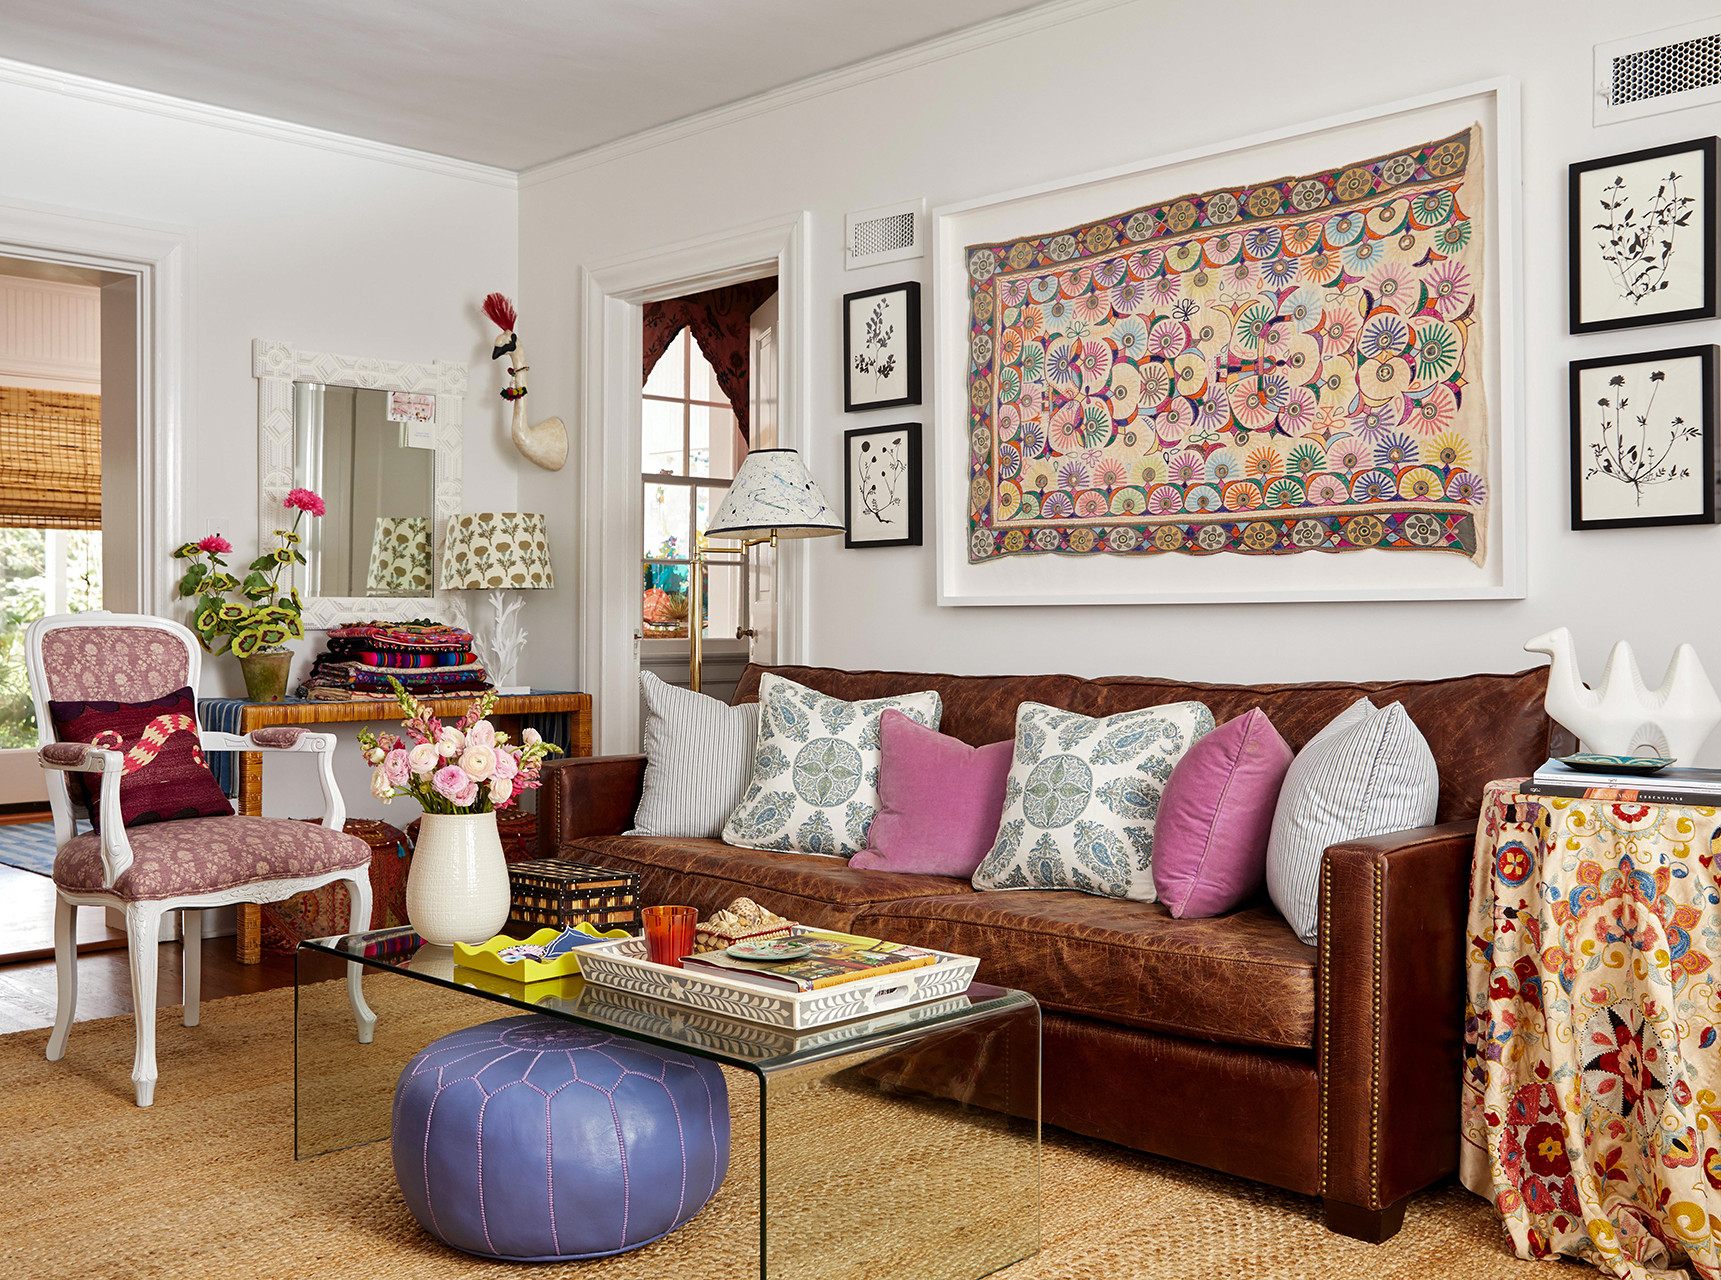 Brown Couches Living Room Ideas
 Our Favorite Ways to Decorate with a Brown Sofa